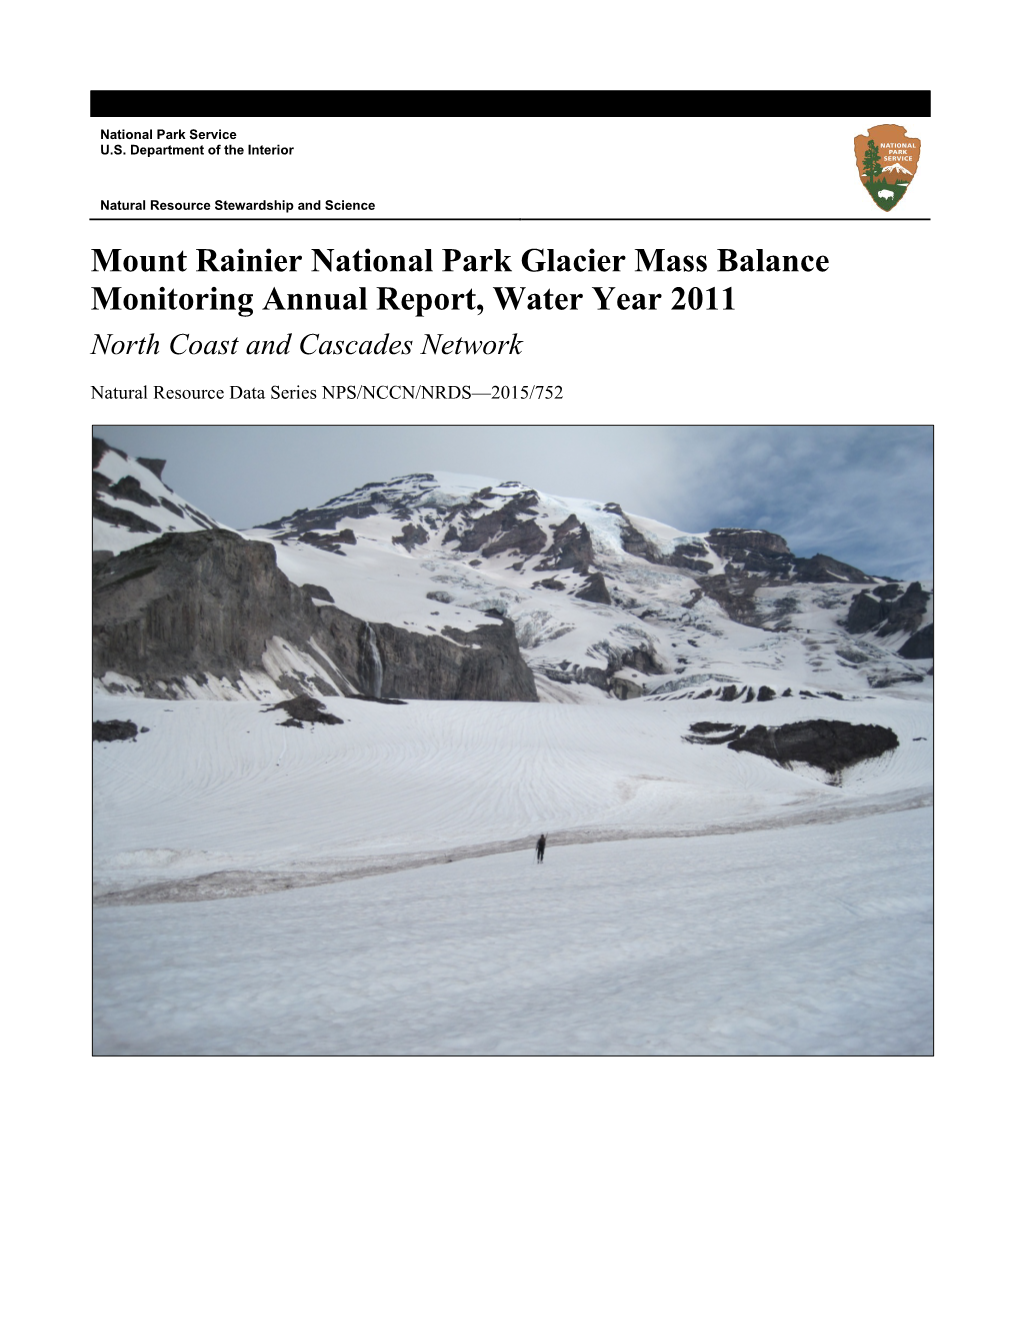 Mount Rainier National Park Glacier Mass Balance Monitoring Annual Report, Water Year 2011 North Coast and Cascades Network